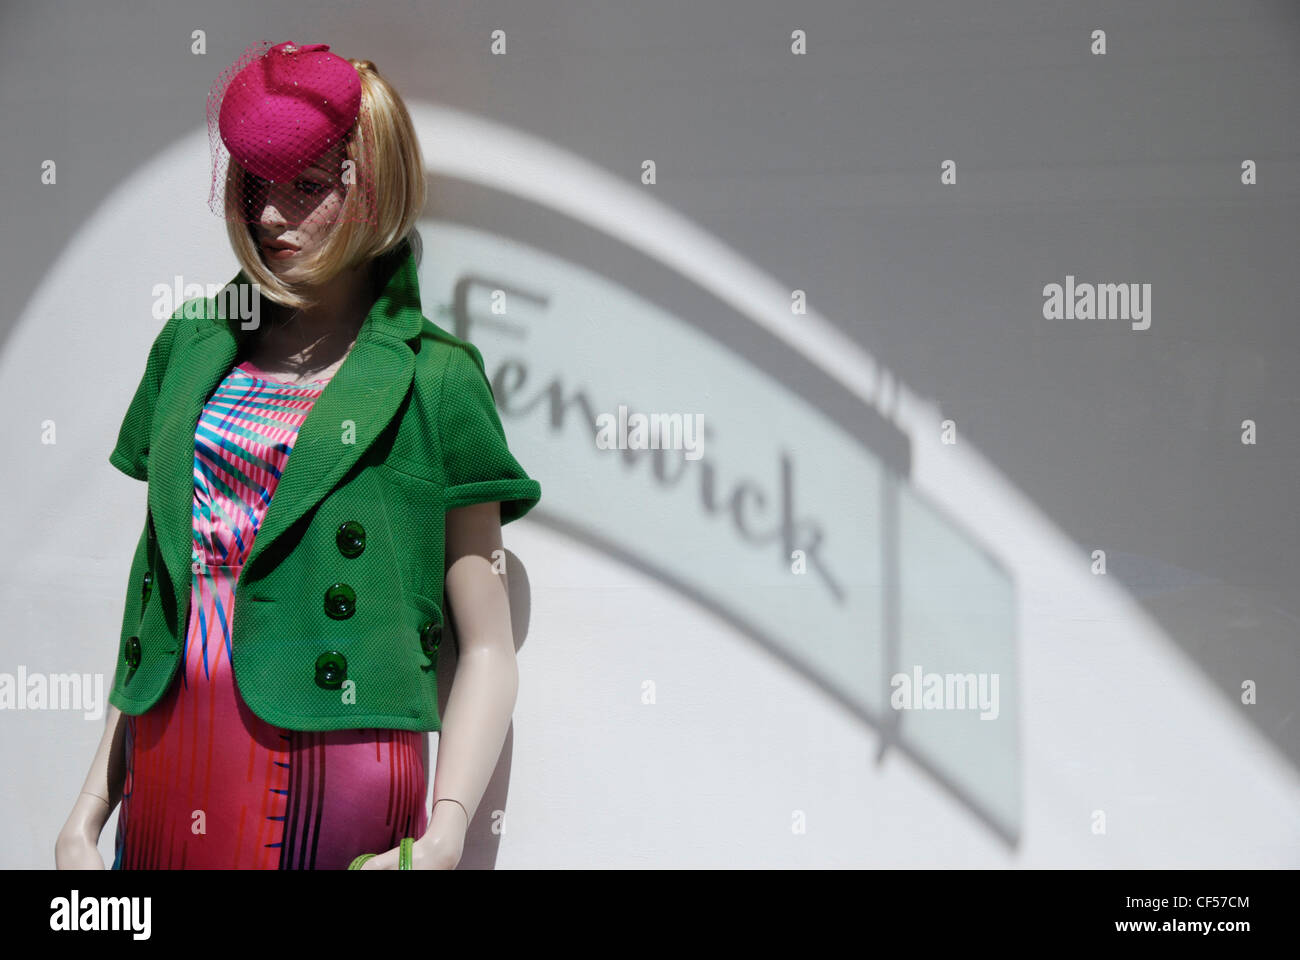 A mannequin in a pink and green outfit on display in Fenwick department store window. Stock Photo